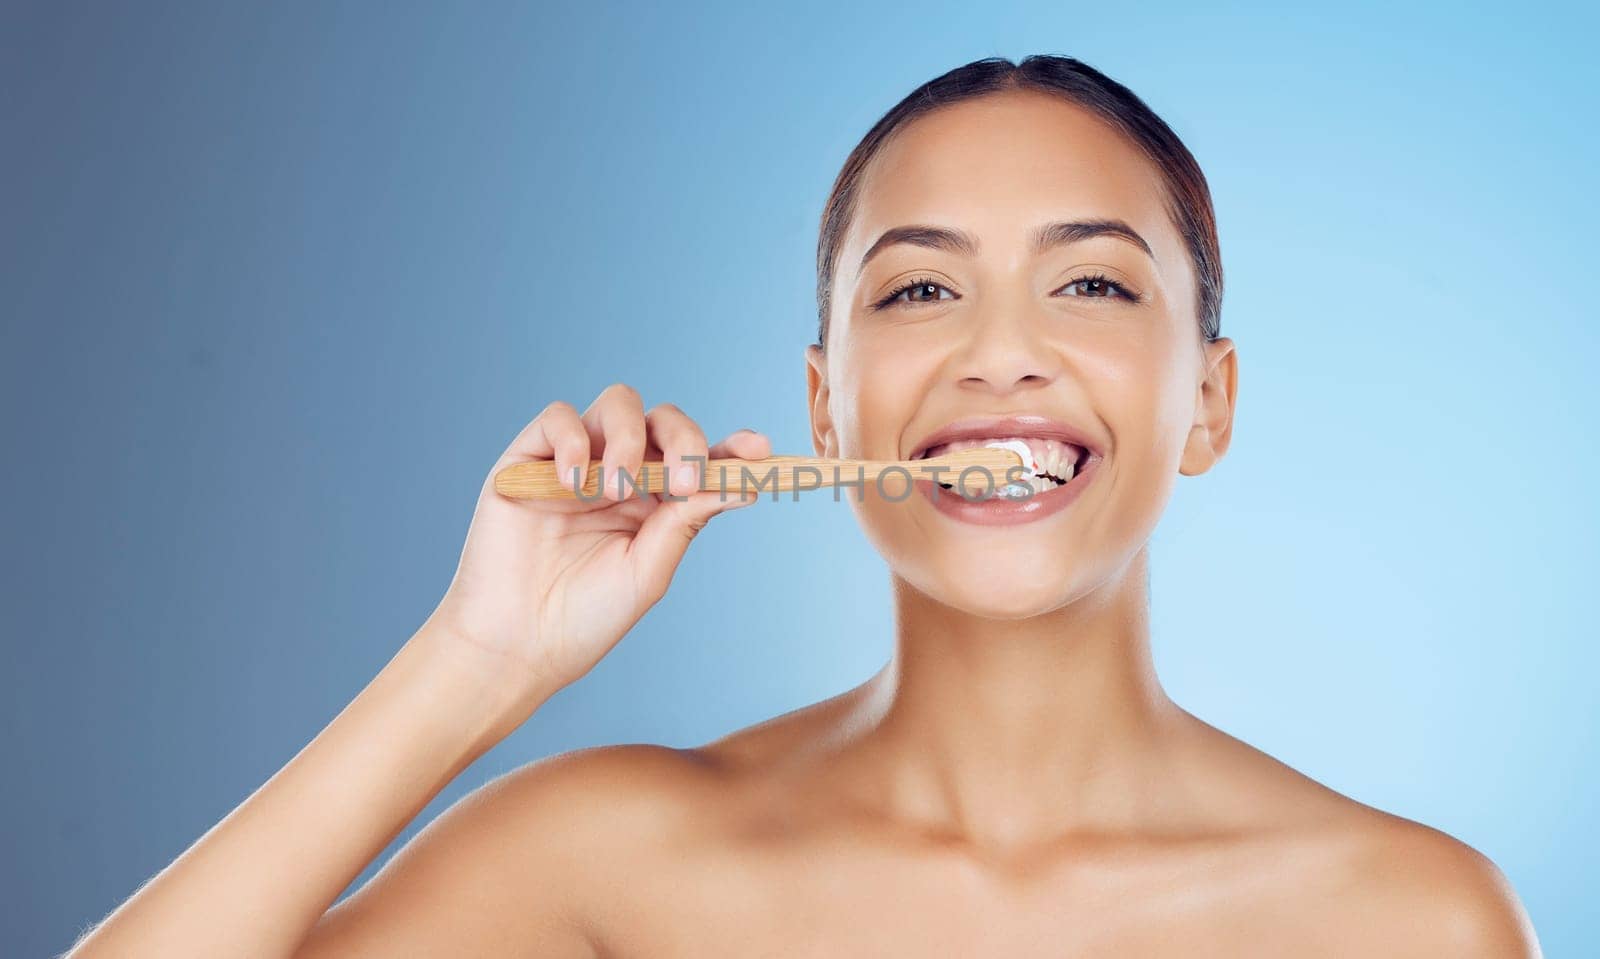 Bamboo toothbrush, toothpaste and portrait of woman for dental wellness, healthy cleaning or model cosmetics. Happy female teeth, eco wooden brush and mouth for smile, face and studio blue background.